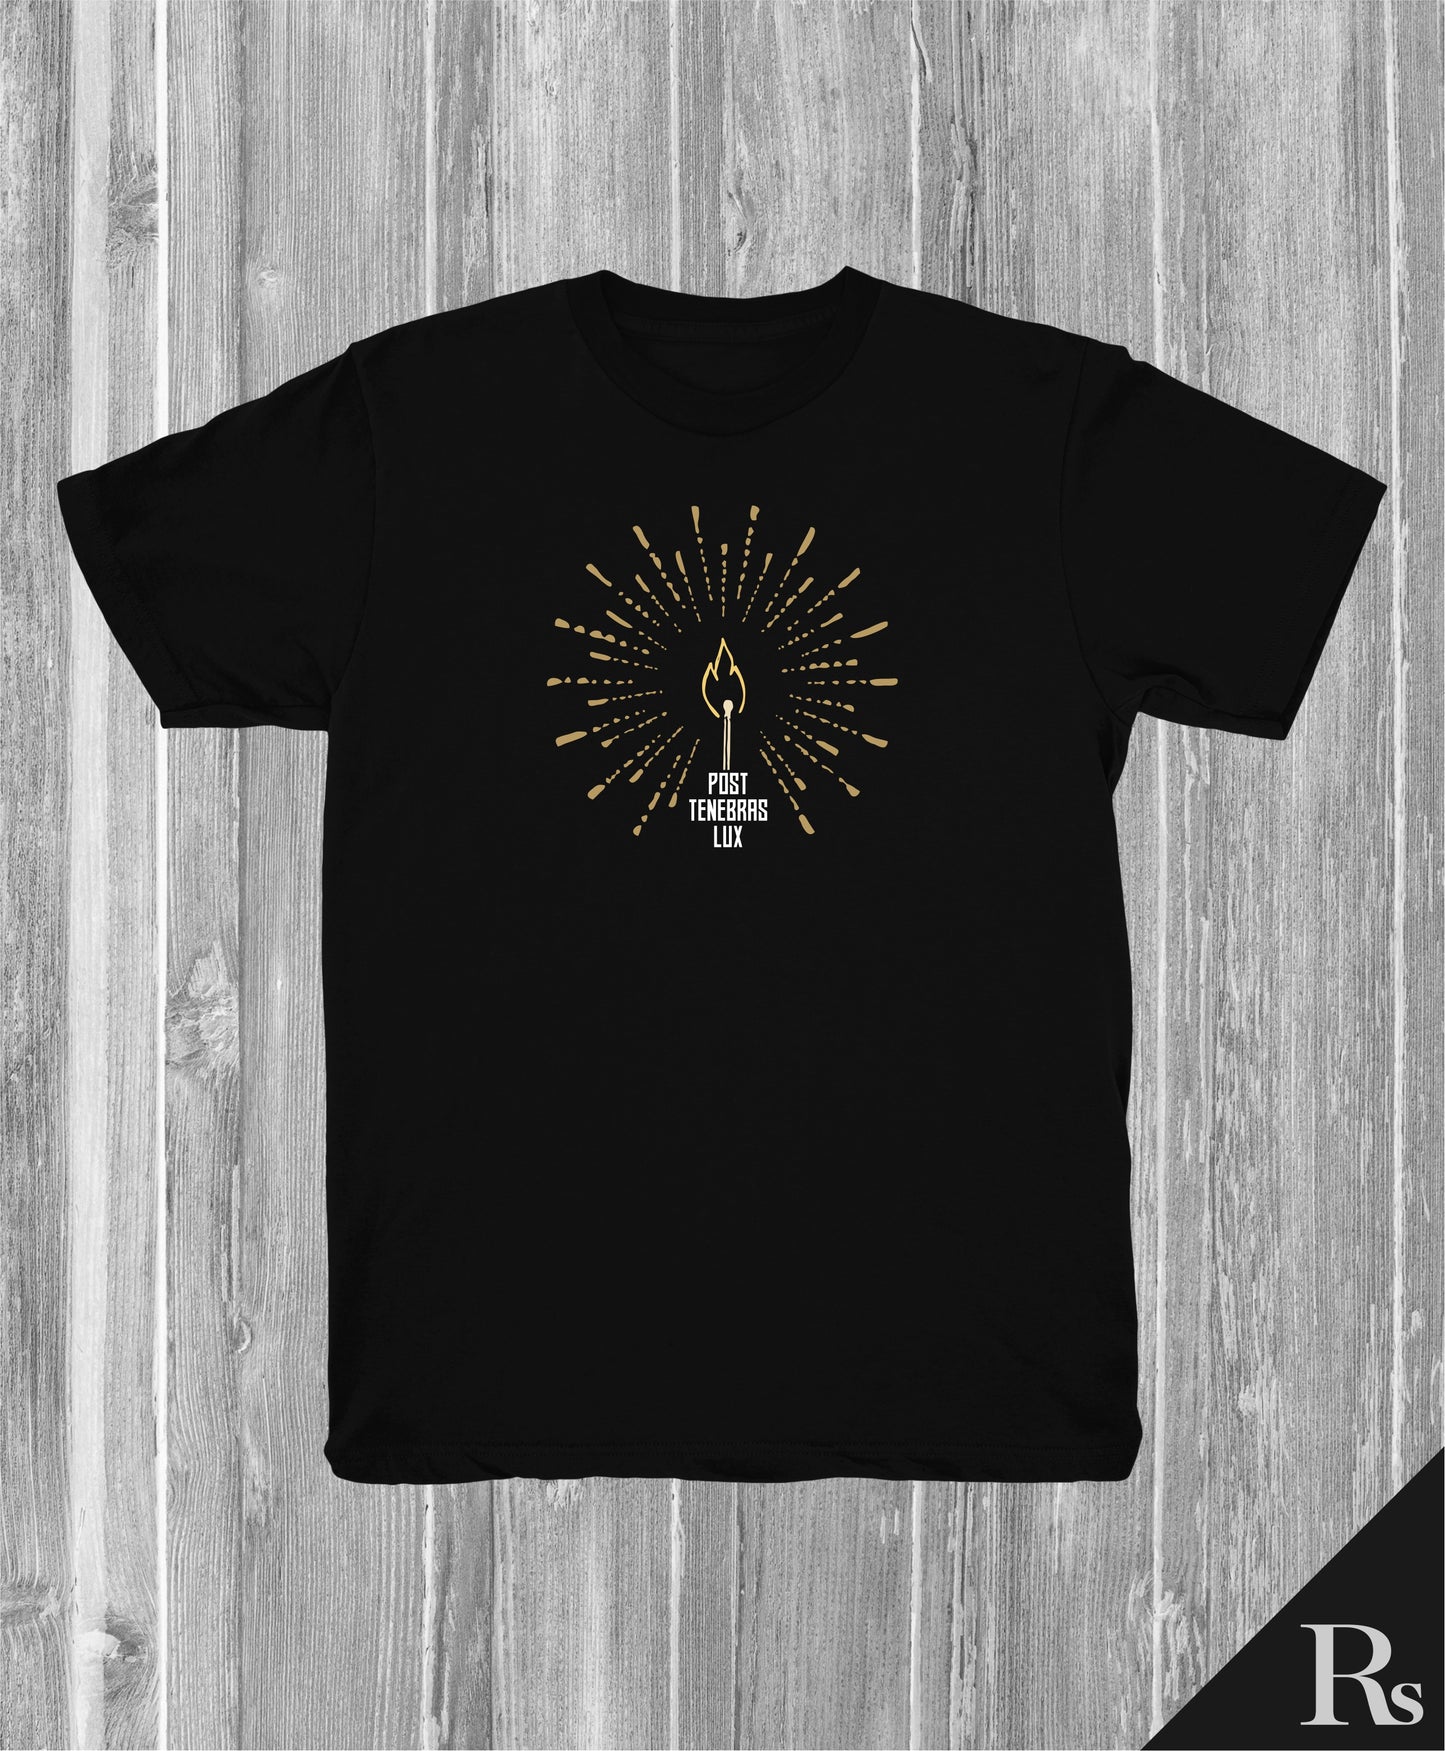 POST TENEBRAS LUX | Rs T-Shirts